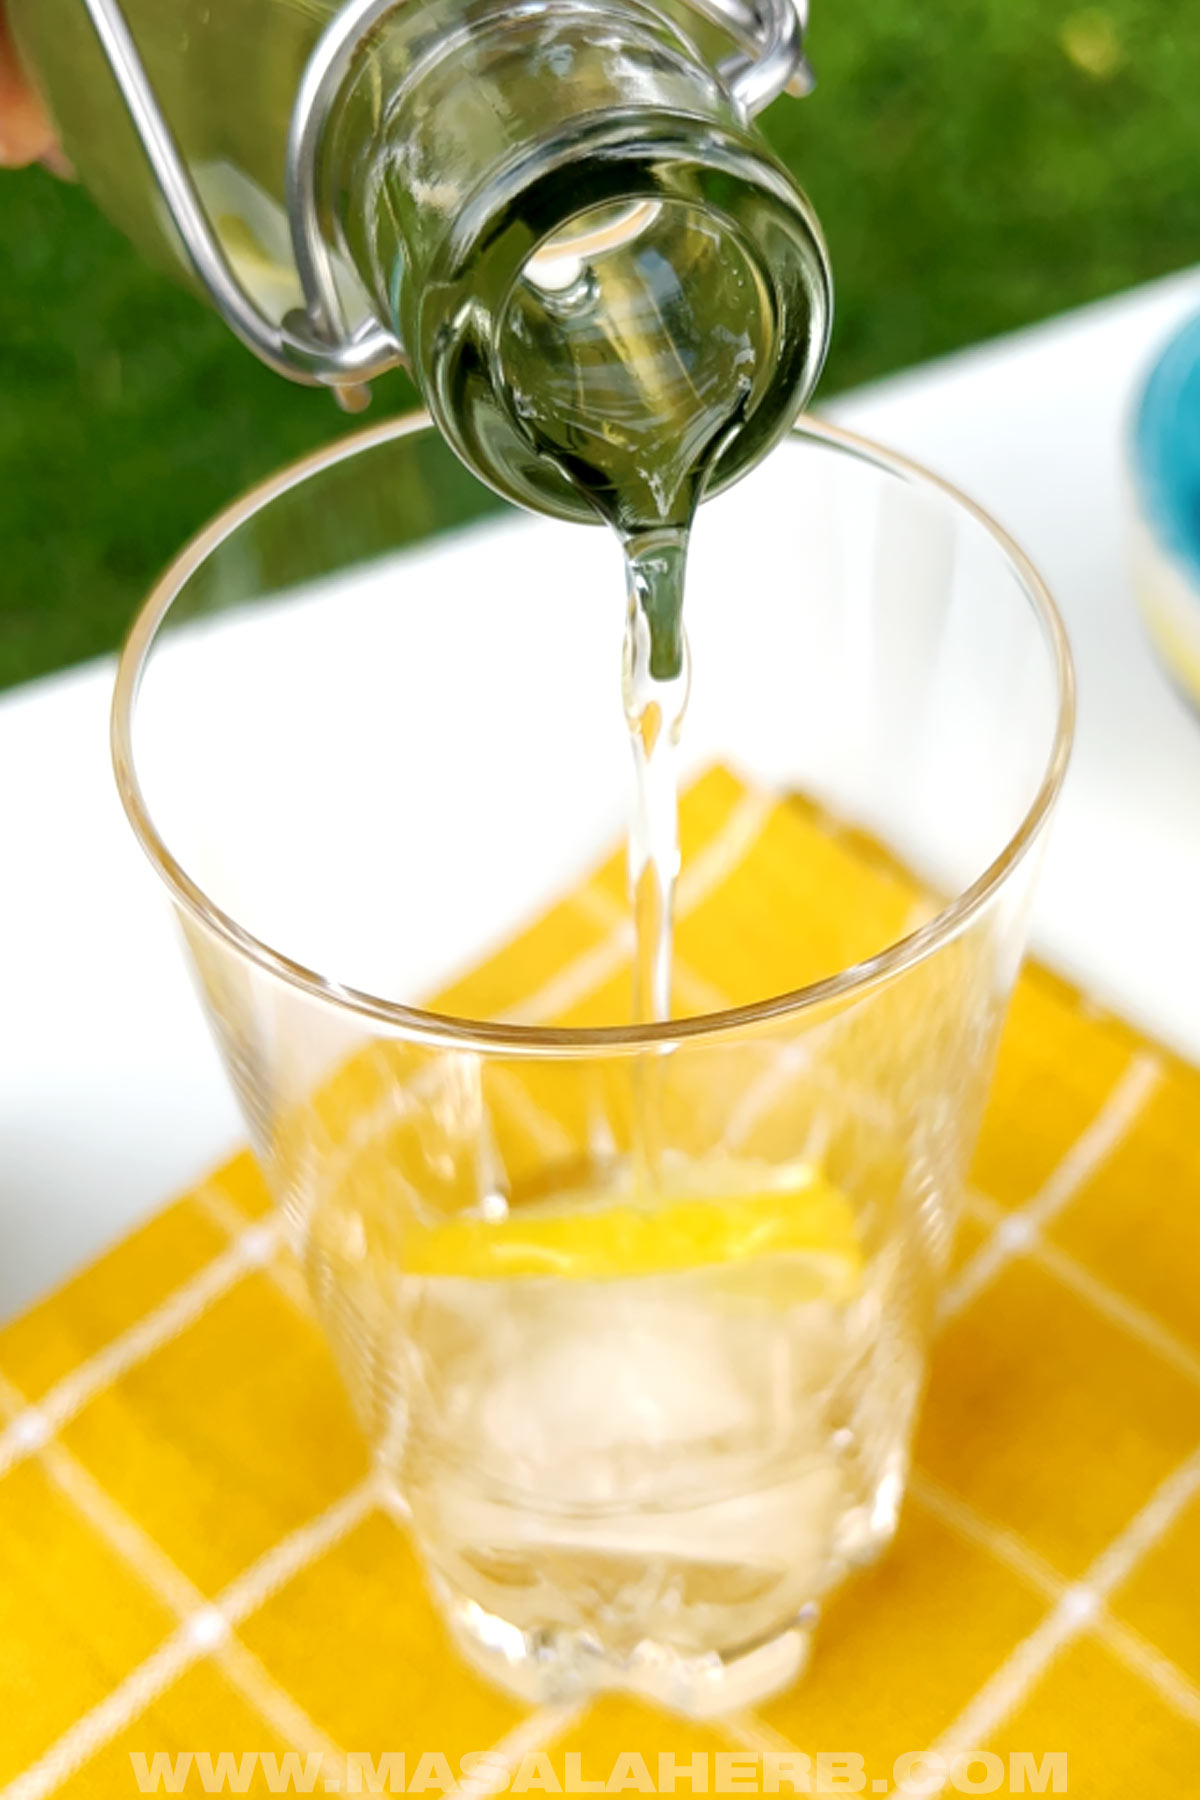 Pouring elderflower syrup into a glass